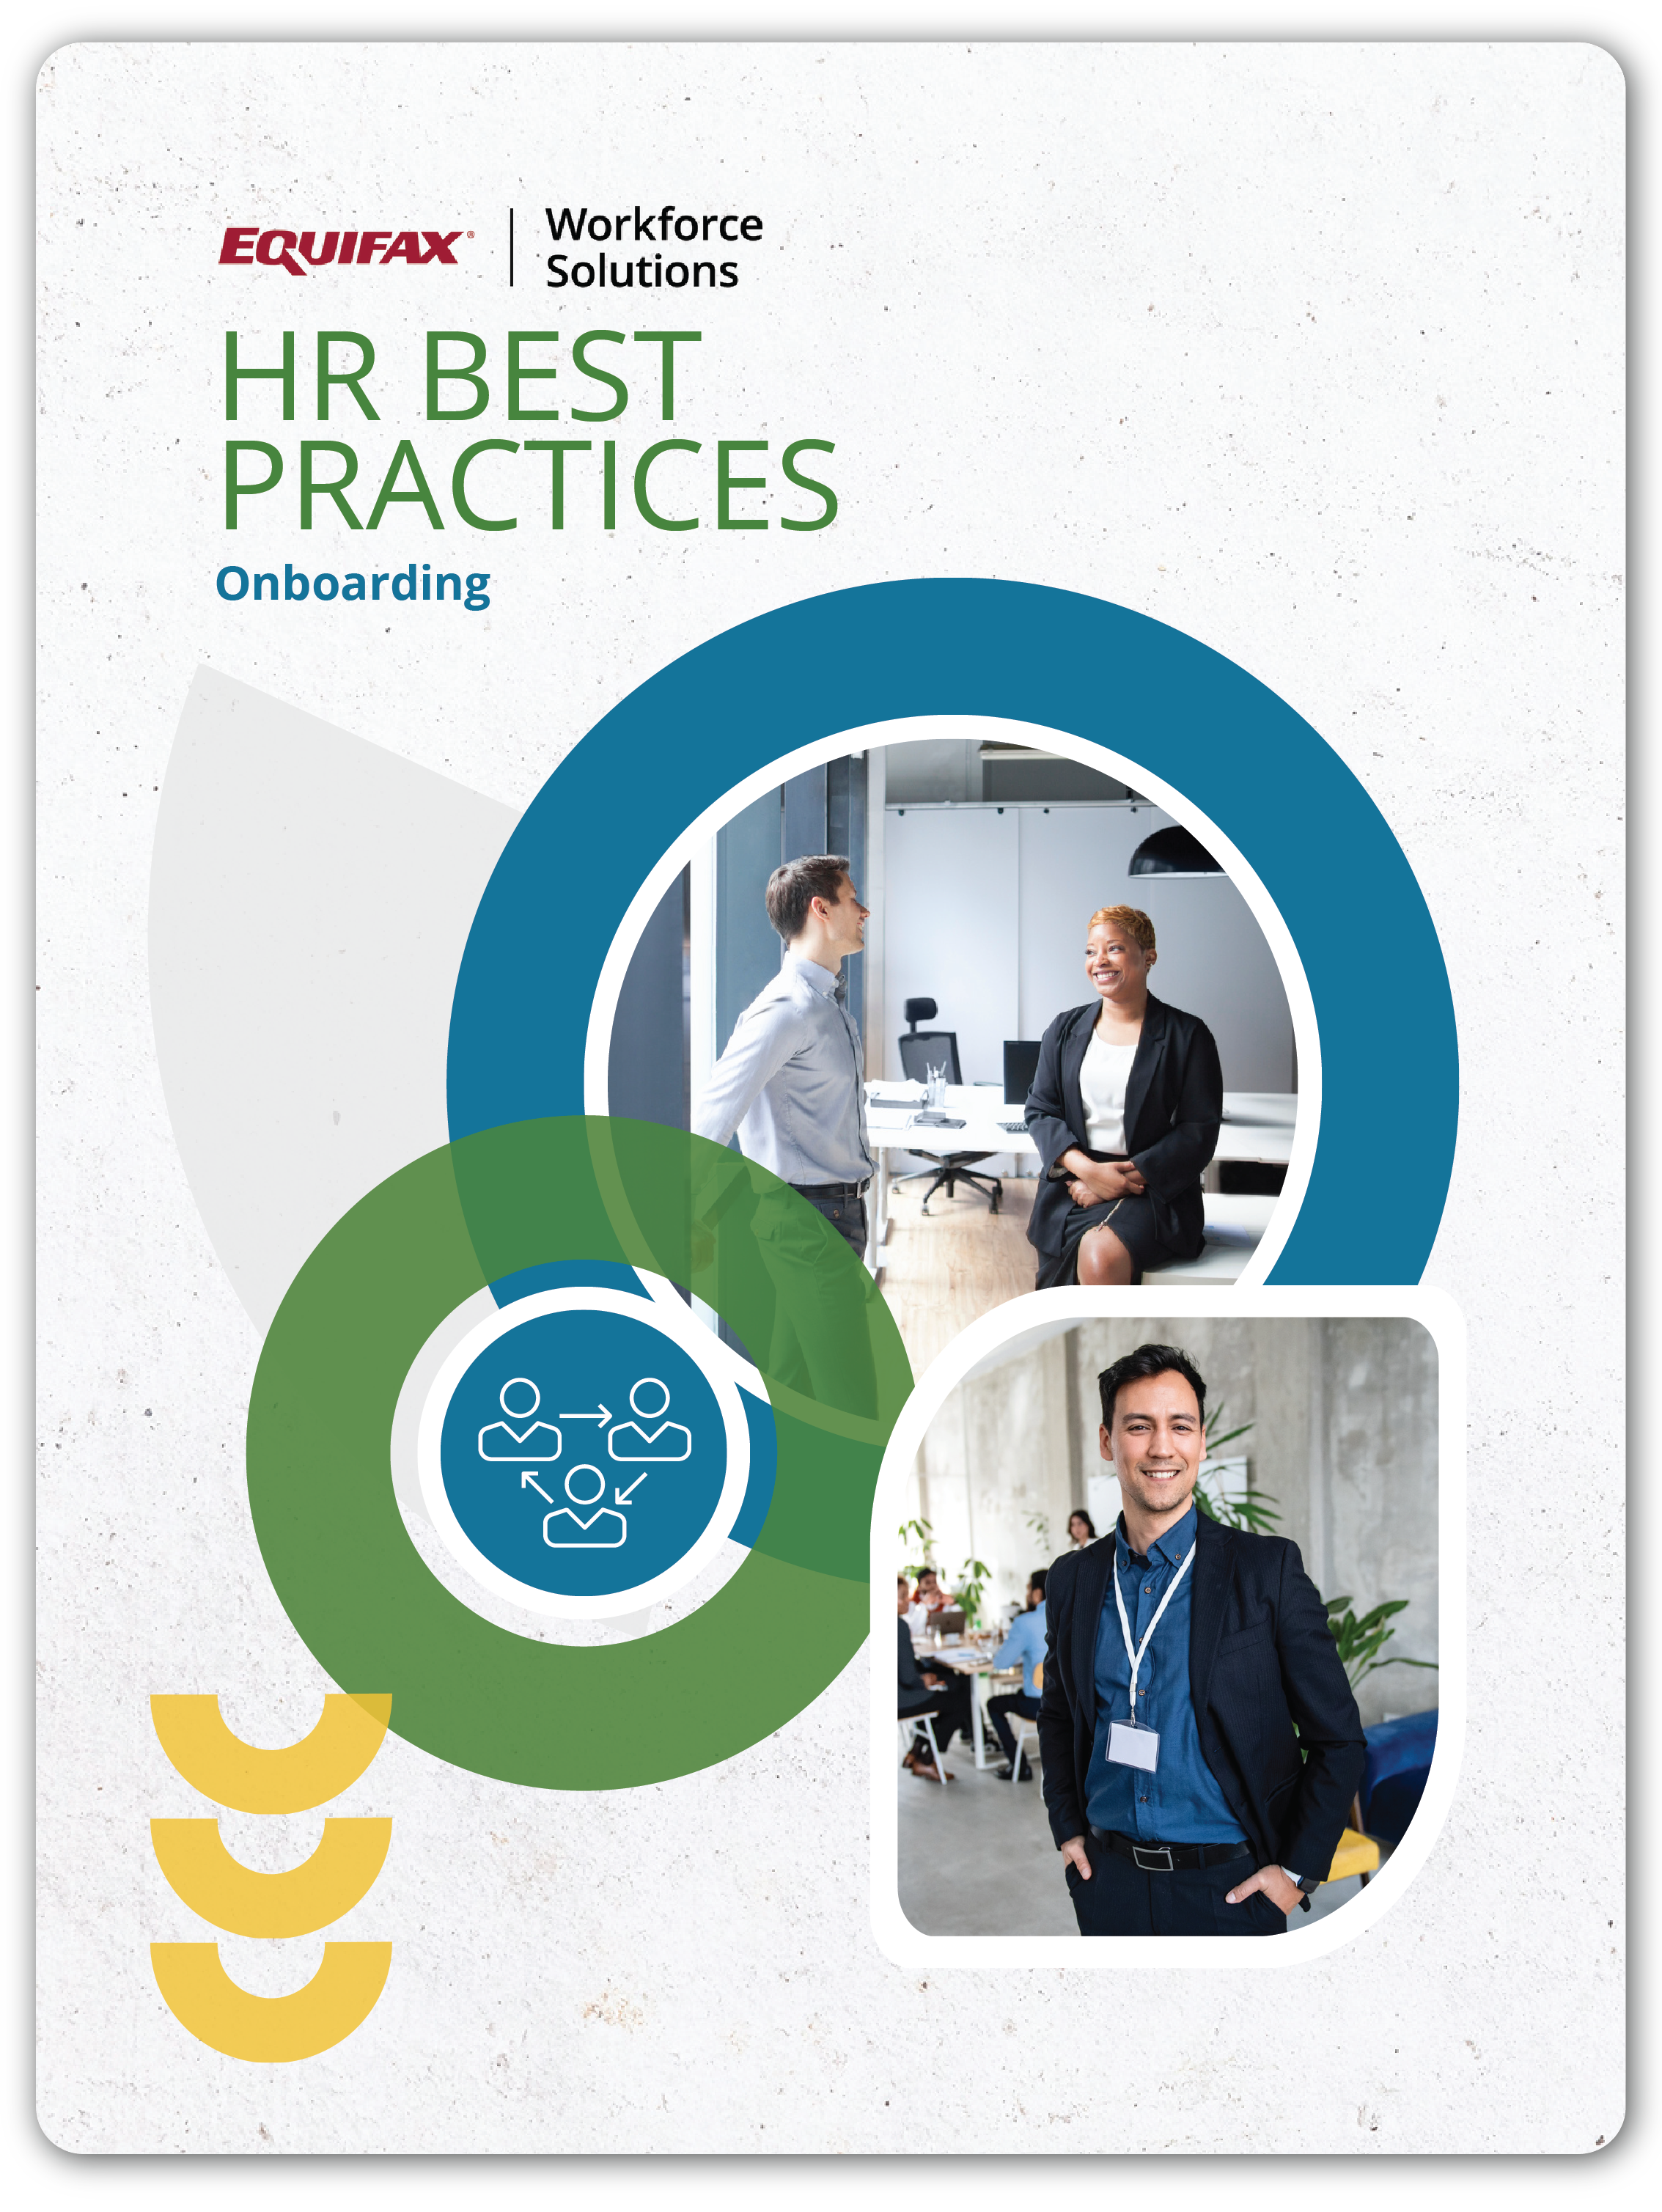 HR Best Practices for Helping Improve the Onboarding Experience Image